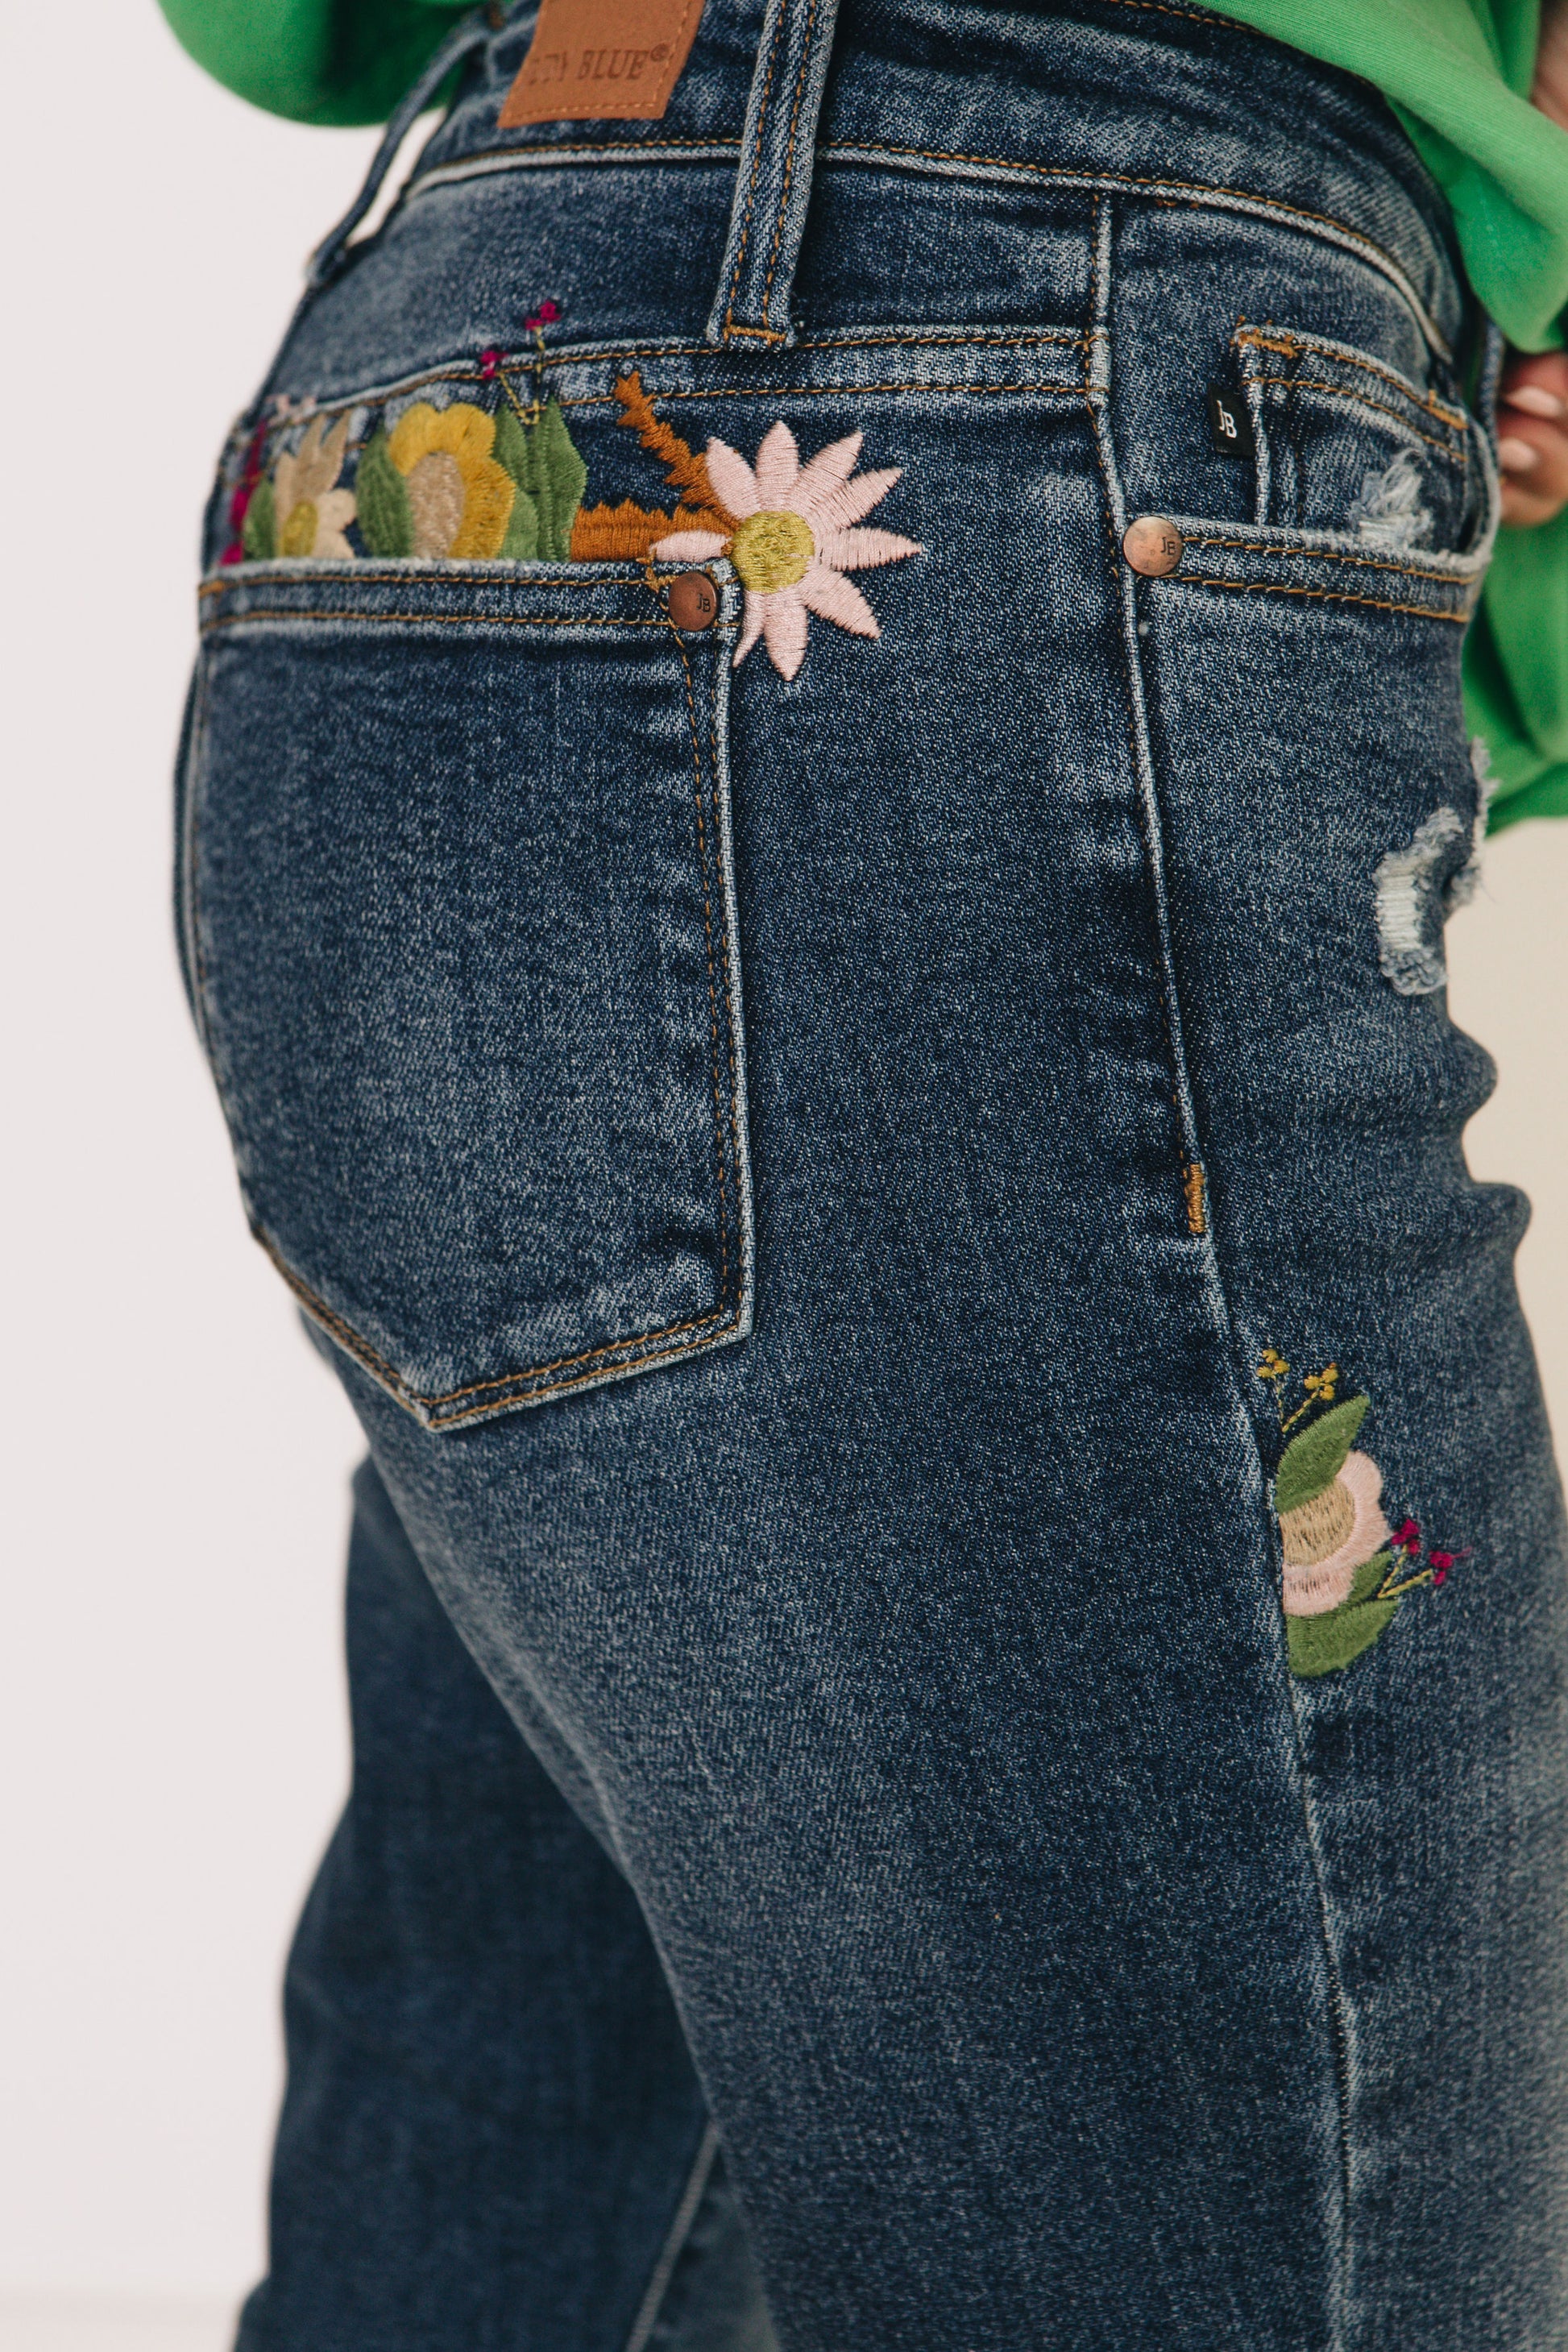 Judy Blue - Pocket Full of Flowers Floral Embroidered Boyfriend Jeans